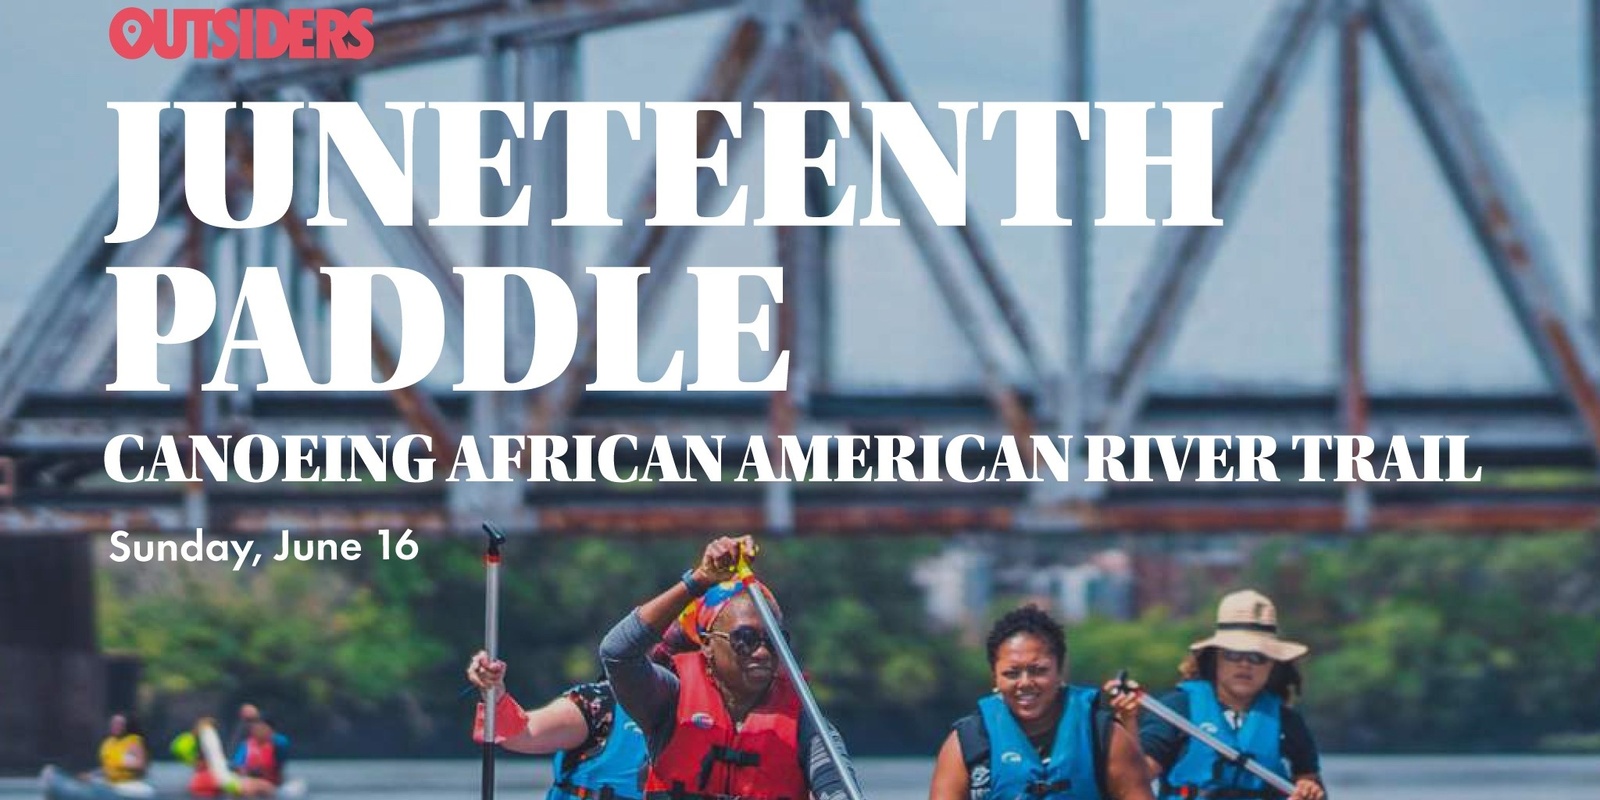 Banner image for JUNETEENTH PADDLE Canoeing the African American River Trail